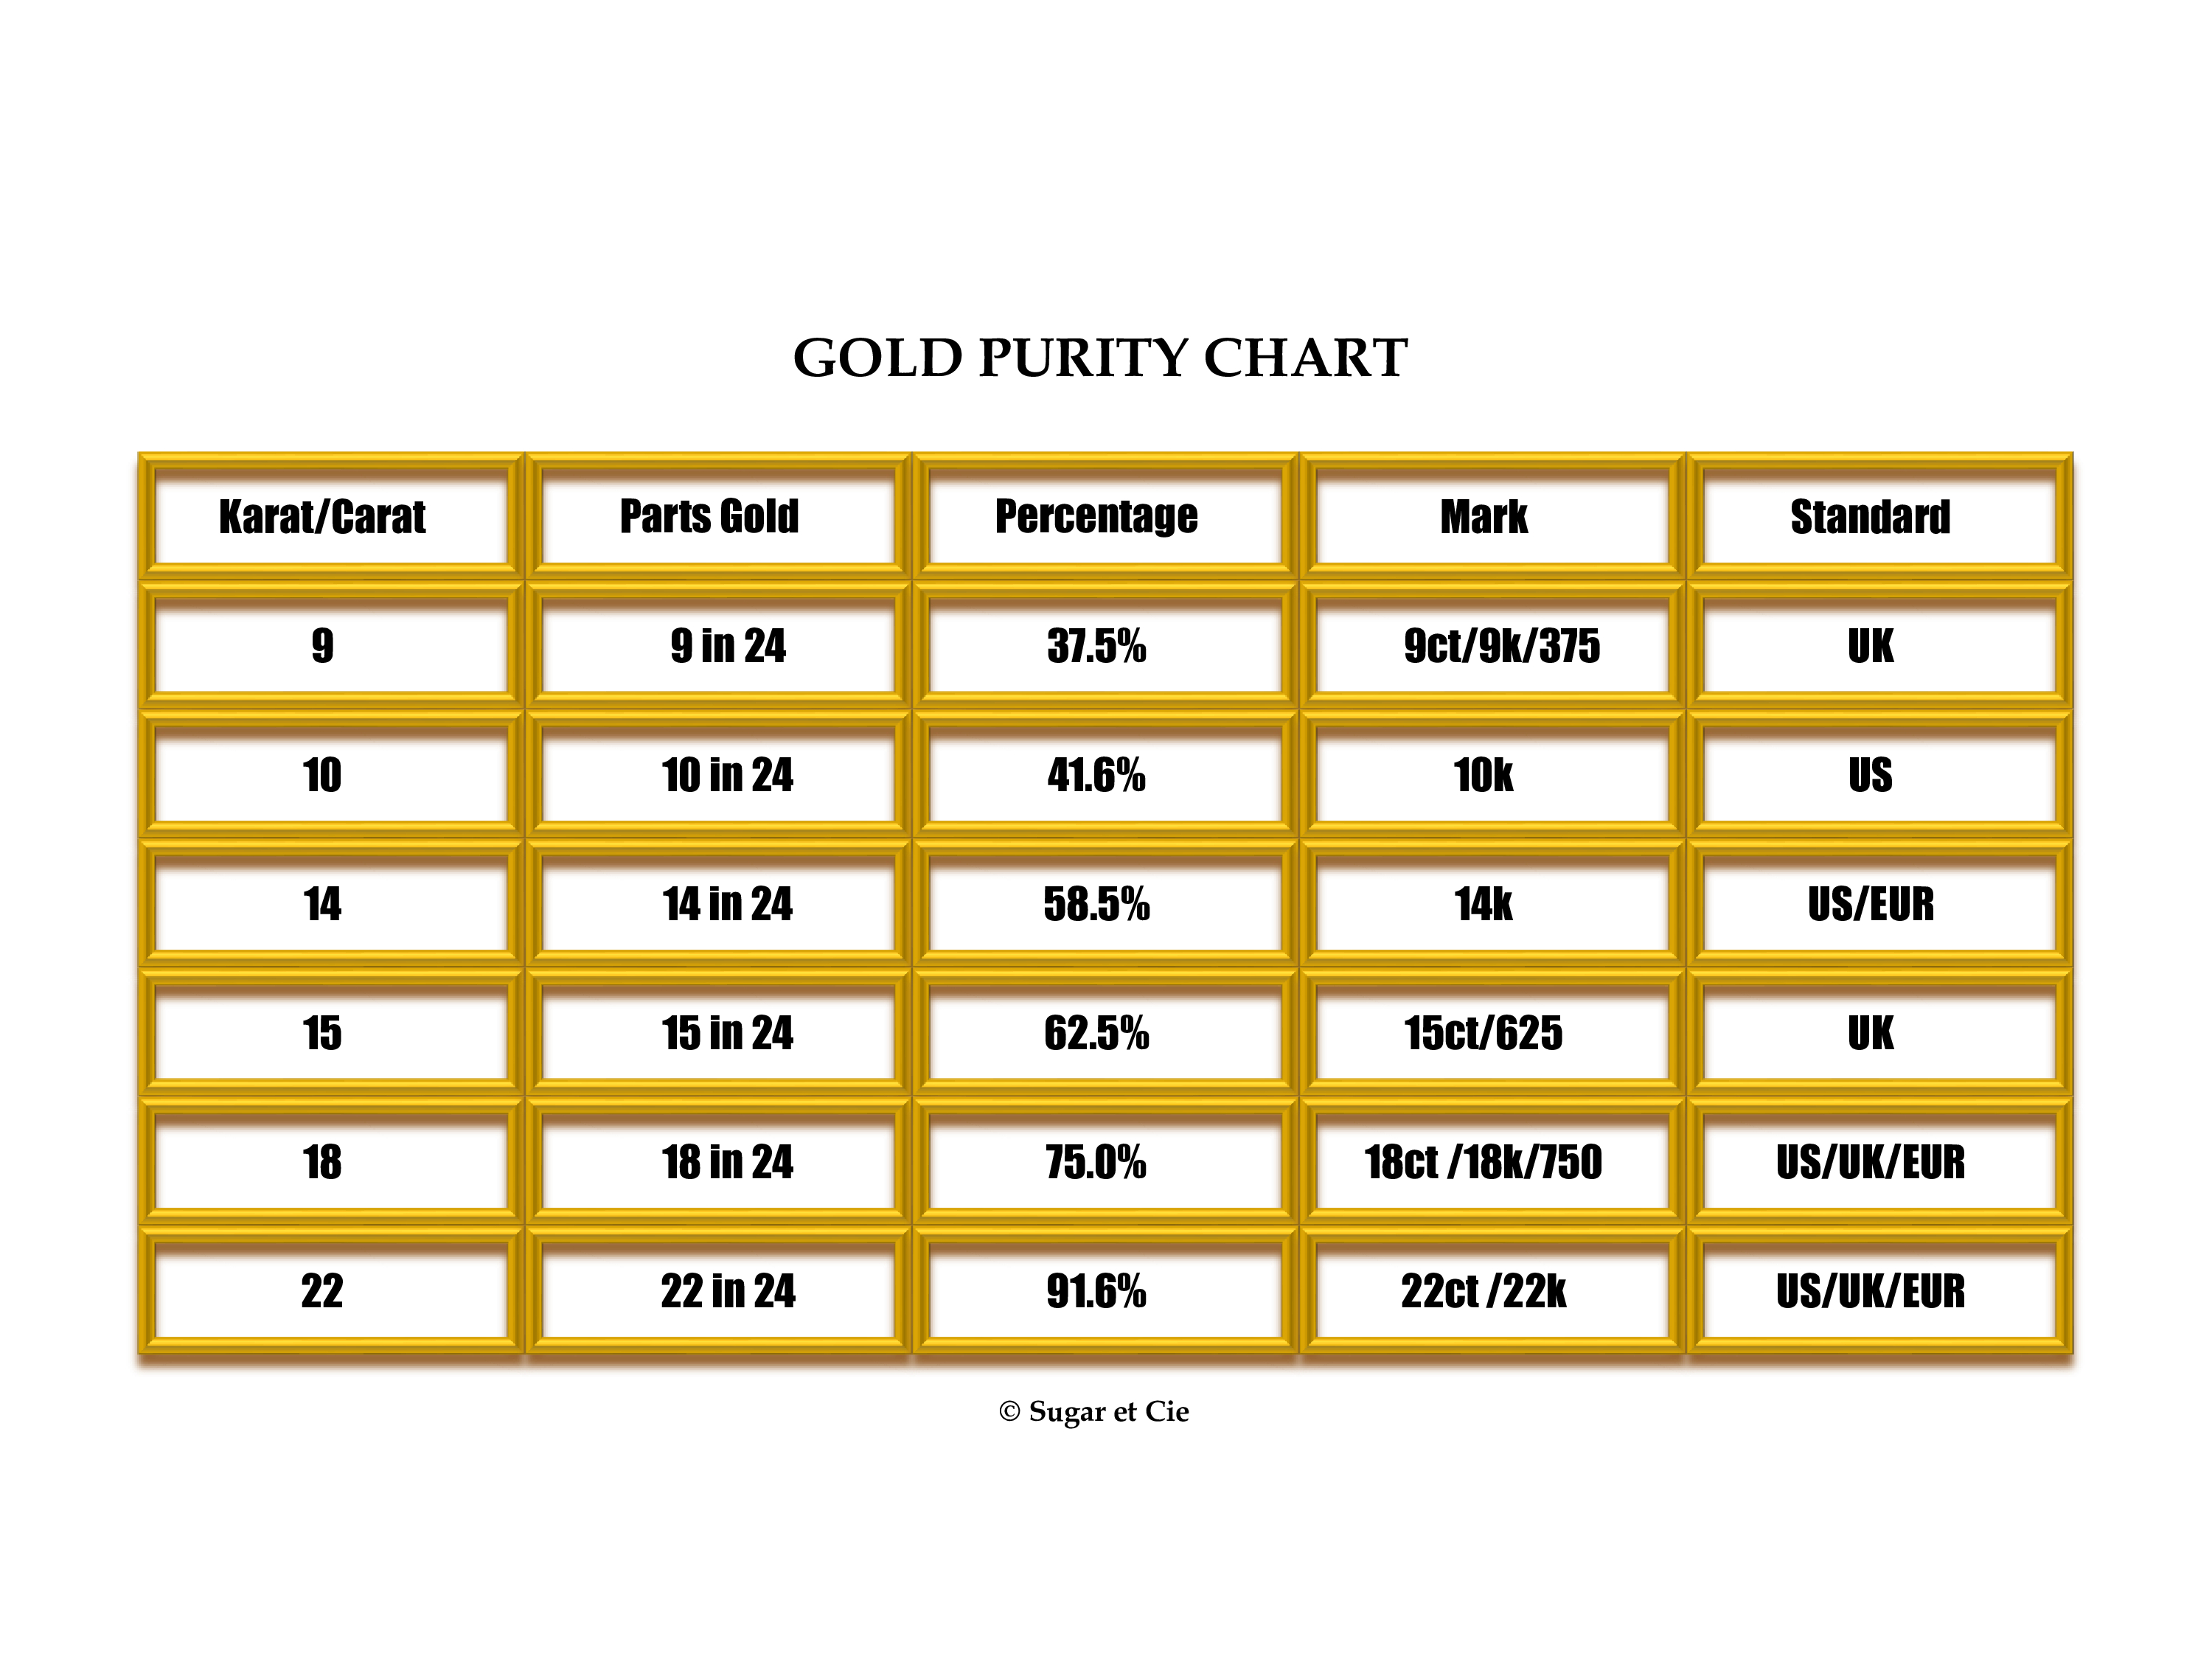 A table that depicts the percentage gold purity in each carat of gold from 9k up to 22k